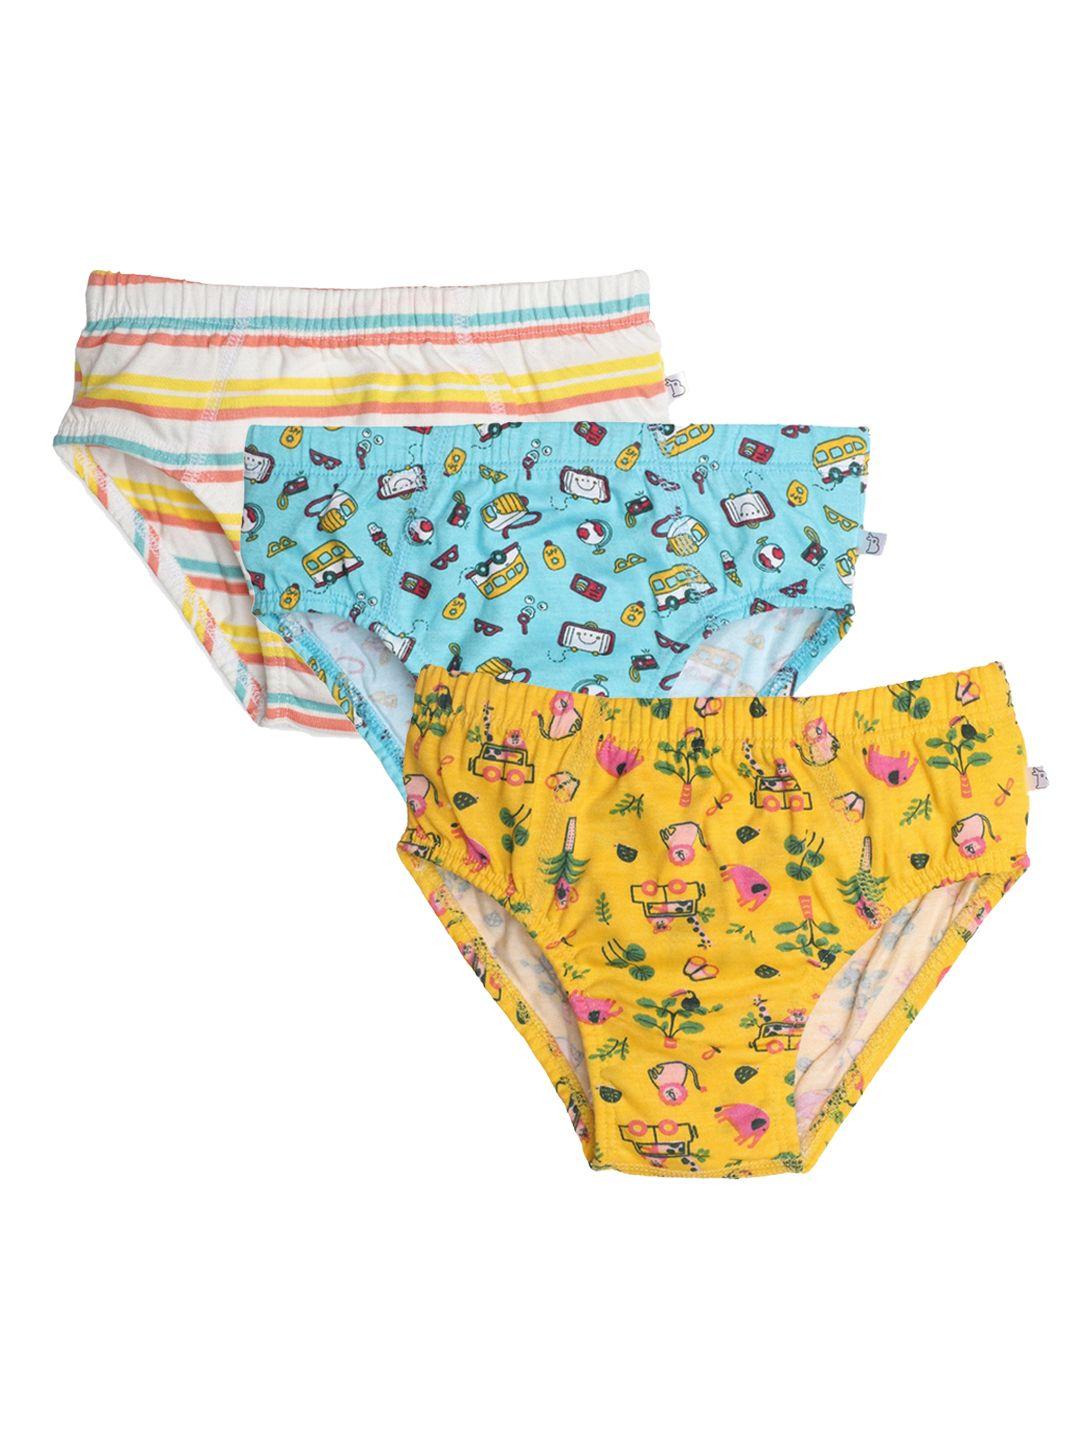 superbottoms-pack-of-3-yellow-&-blue-printed-briefs